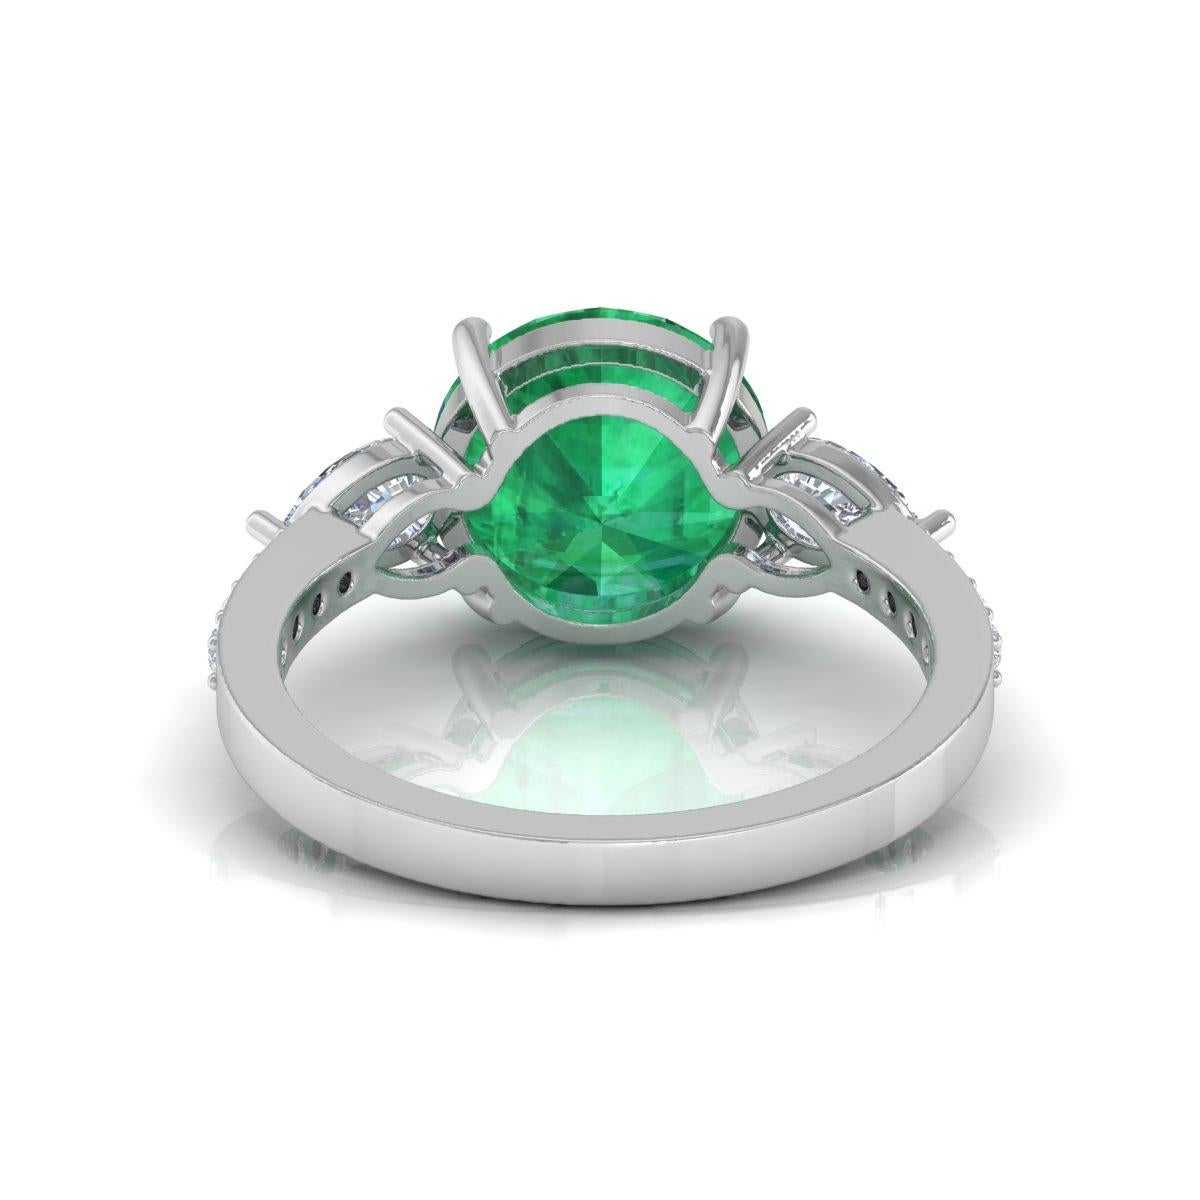 Modern Zambian Emerald Cocktail Ring Pear Diamond Solid 14k White Gold Handmade Jewelry For Sale